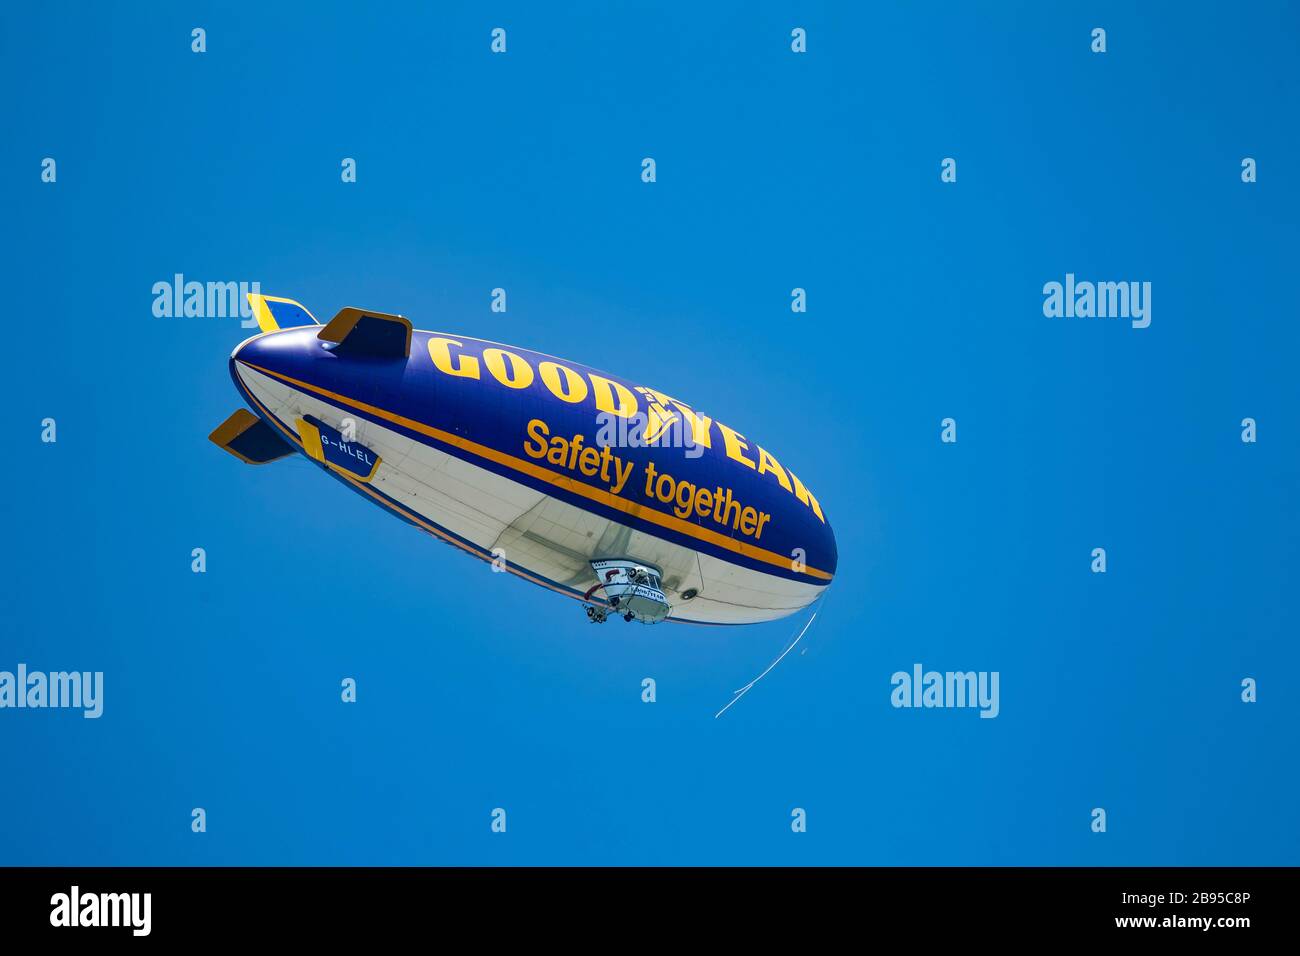 The Good Year airship (blimp) flying over West Yorkshire, U.K. against a clear blue sky en route to televise a sports event Stock Photo